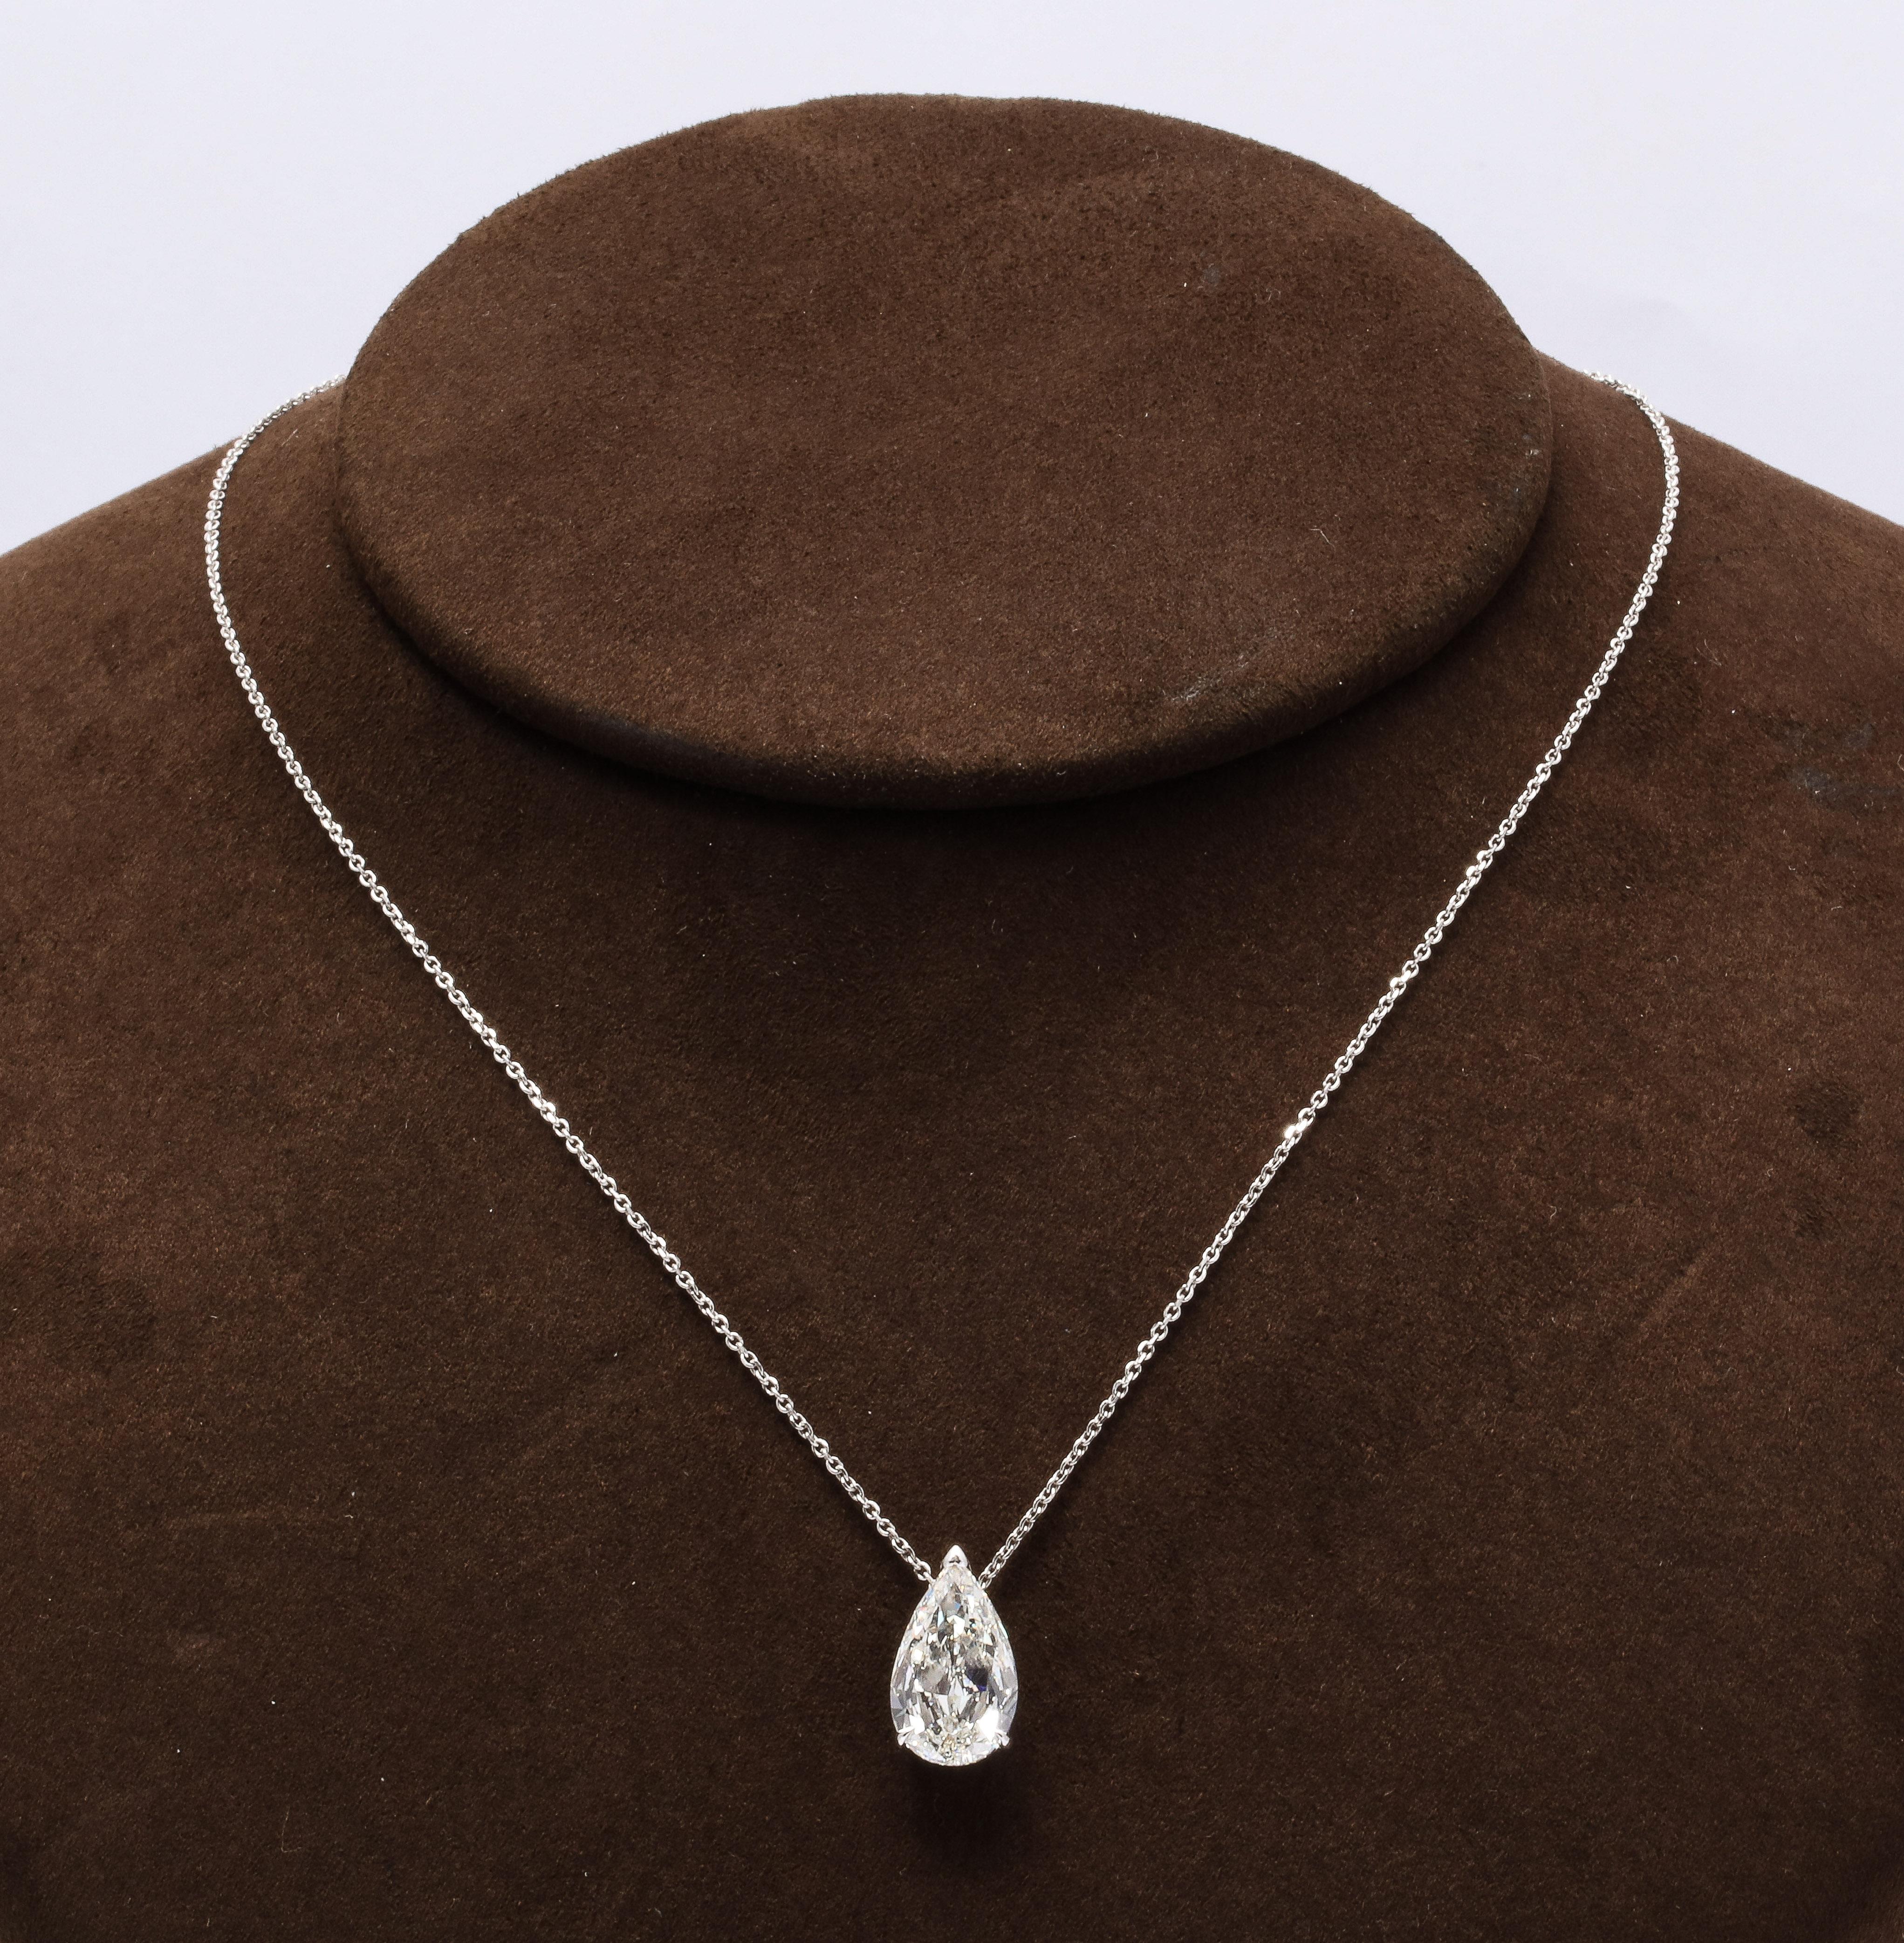 
An INCREDIBLE diamond pendant!

3.06 GIA certified F color VS1 pear shape diamond diamond -- full of life and sparkle!

The stone looks like a 5 carat pear shape -- it measures 14.86 x 8.74 mm. 

set in 14k white gold on a 16 inch chain. 

An